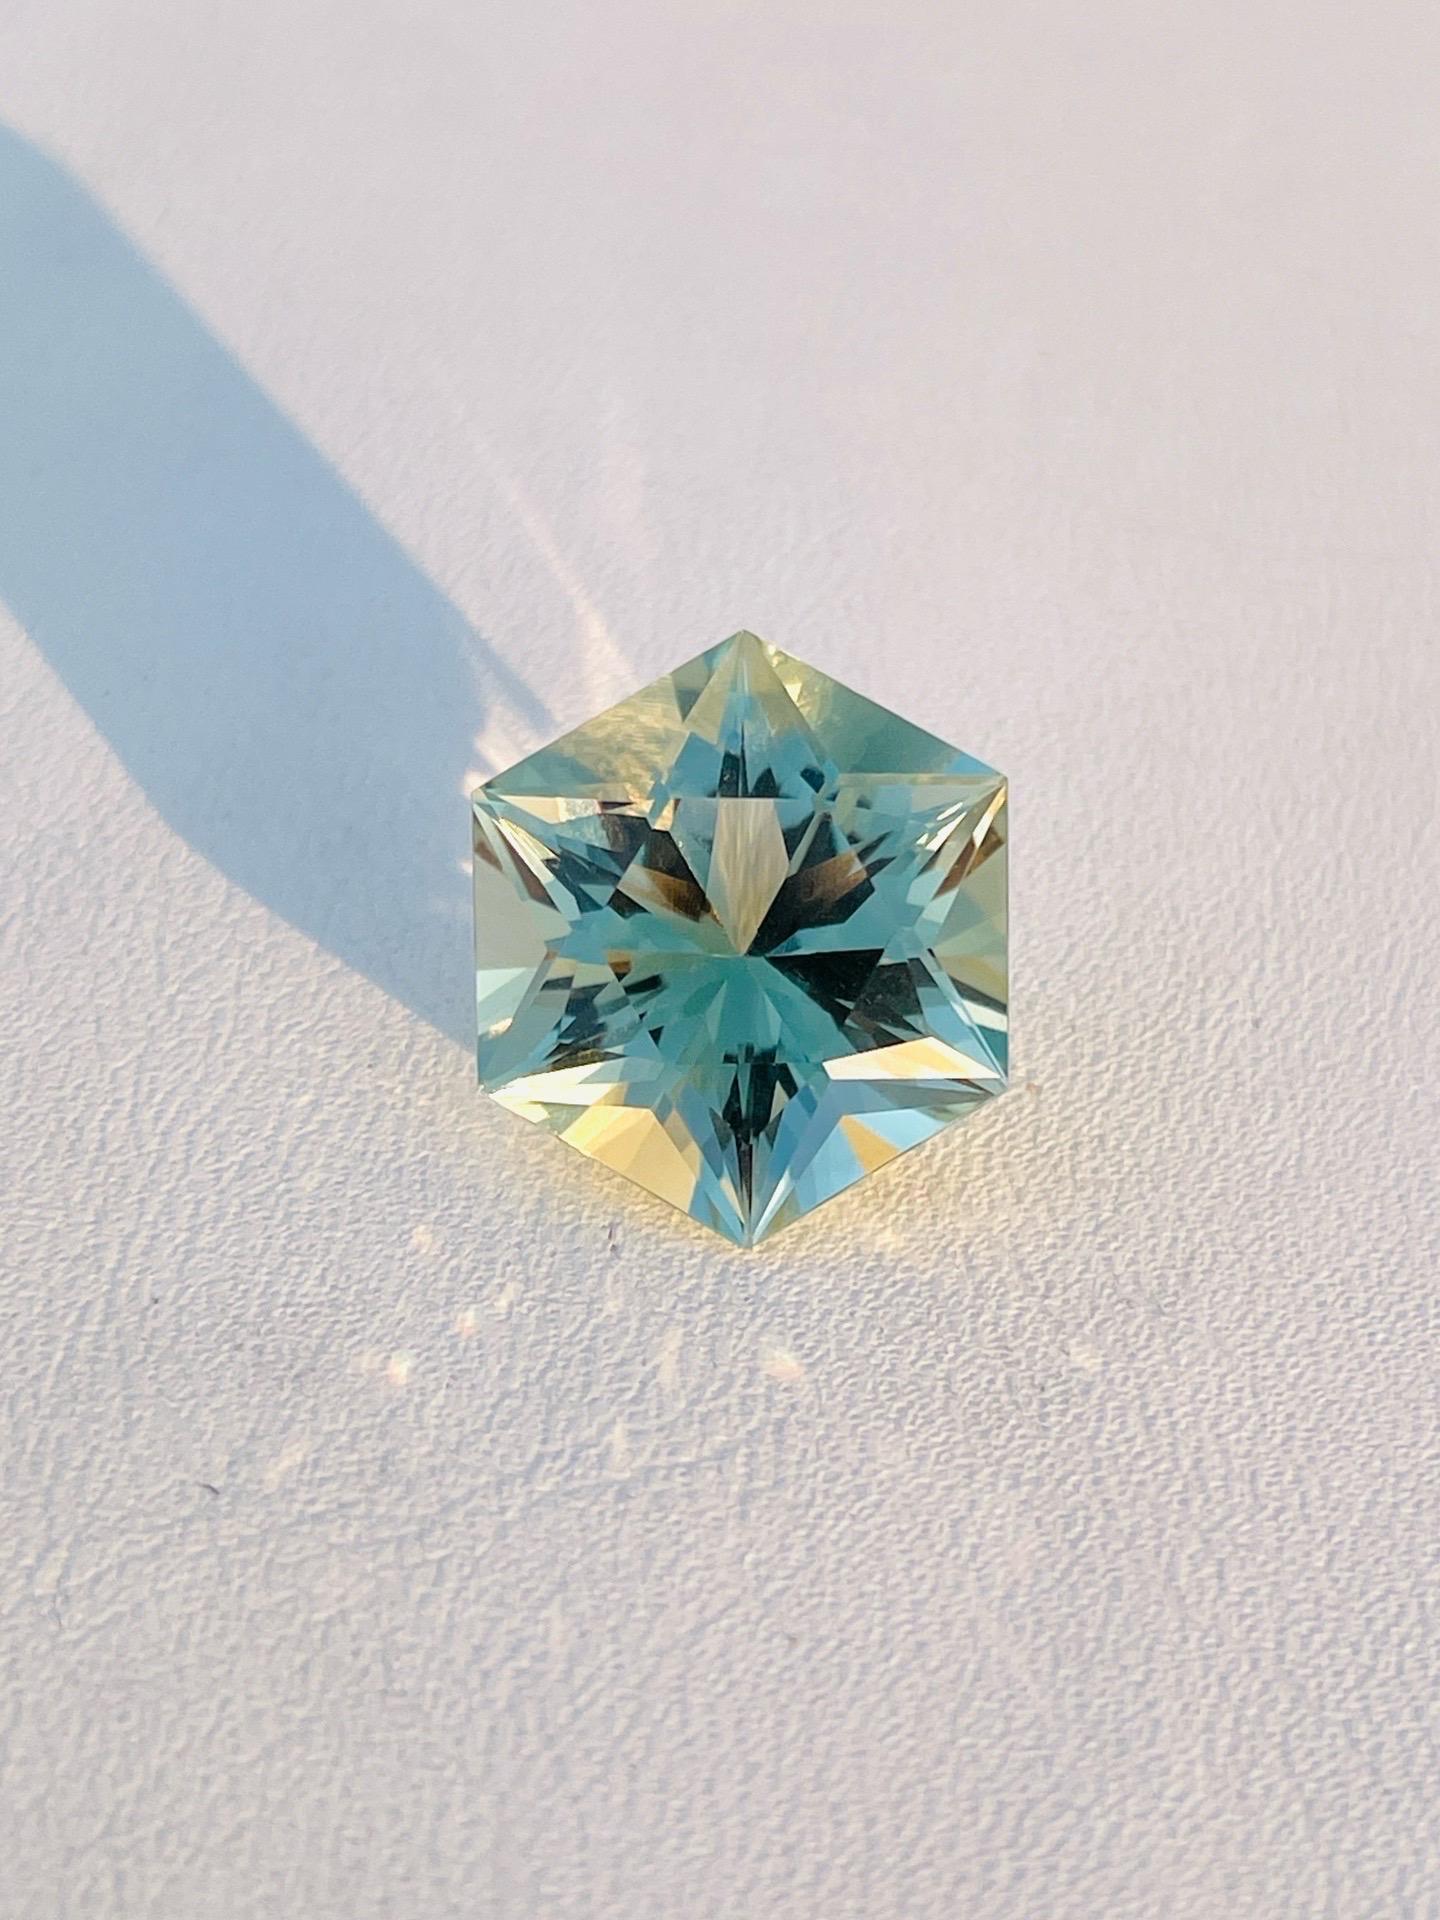 Hexagon Cut Master precision cutting gemstone Natural Green amethyst 10.31ct unique piece  For Sale